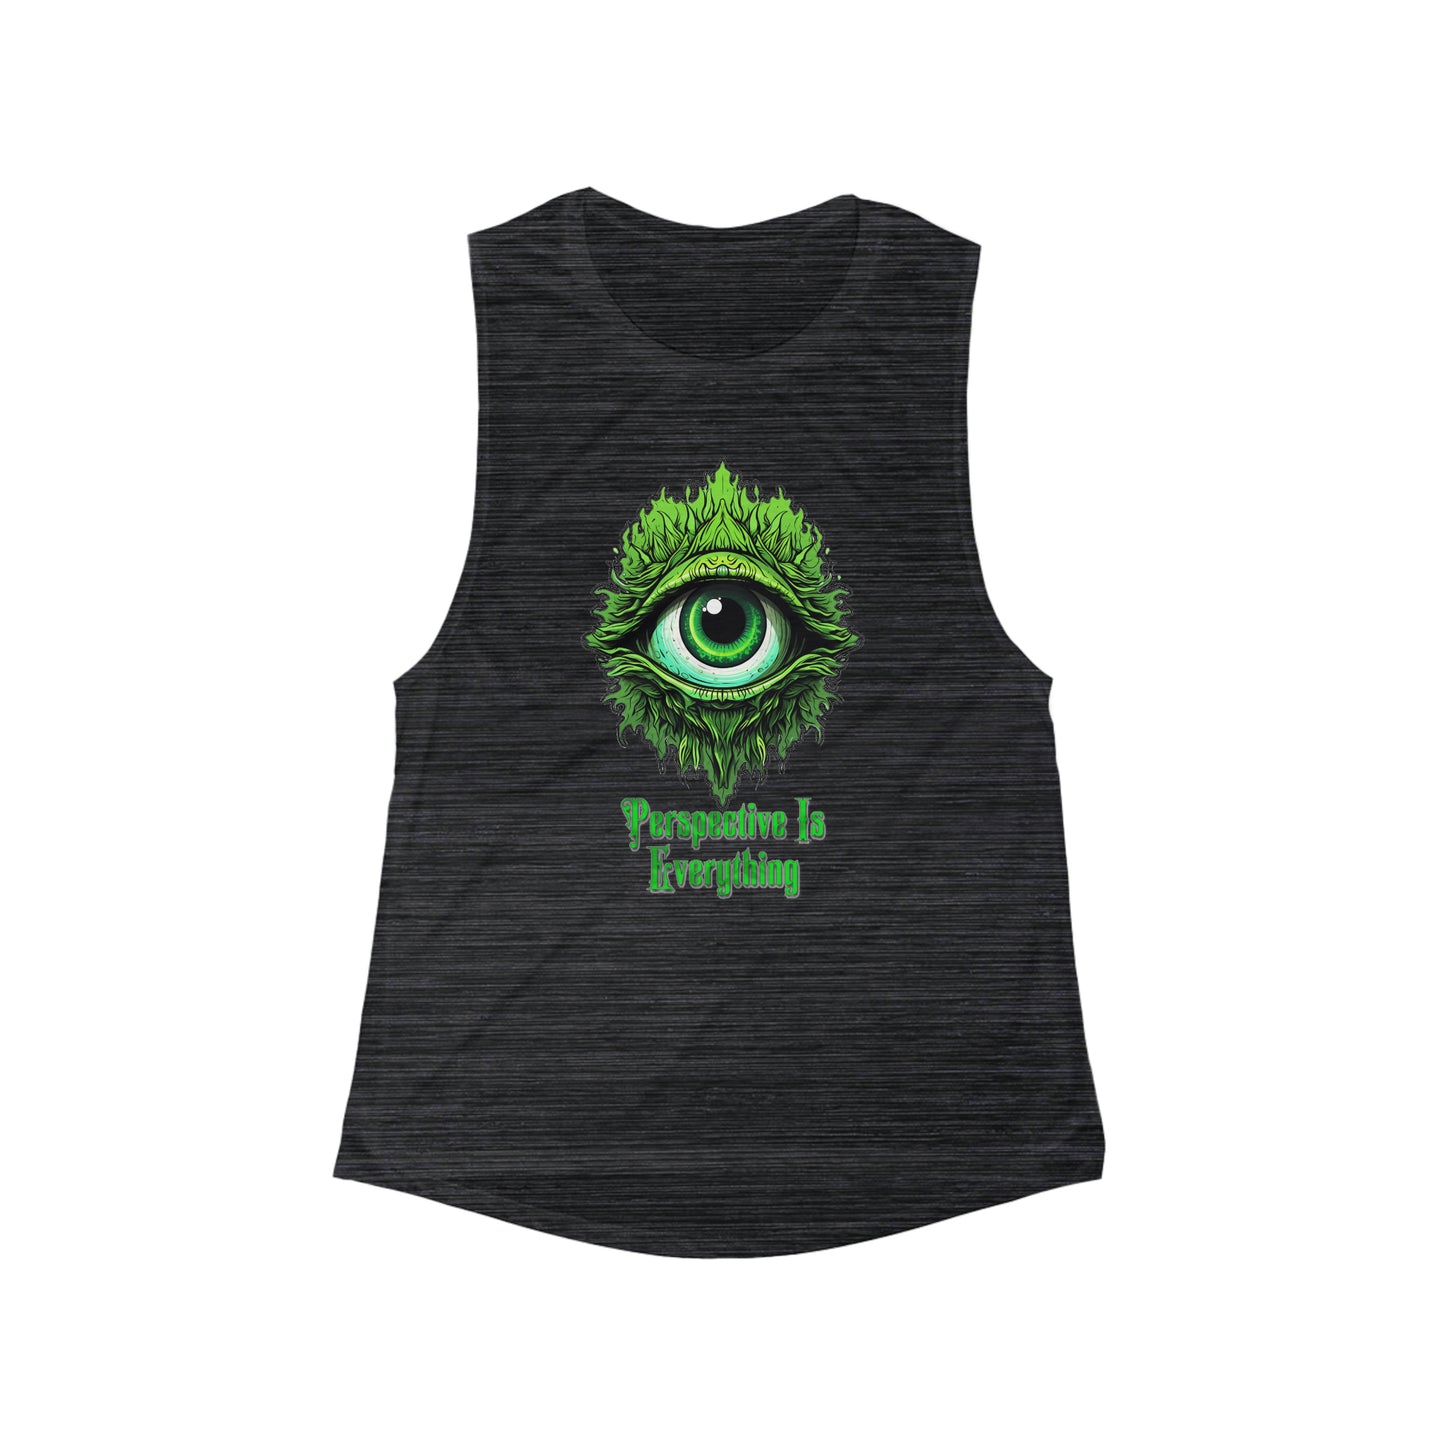 Perspective is Everything: Green | Women's Flowy Scoop Muscle Tank